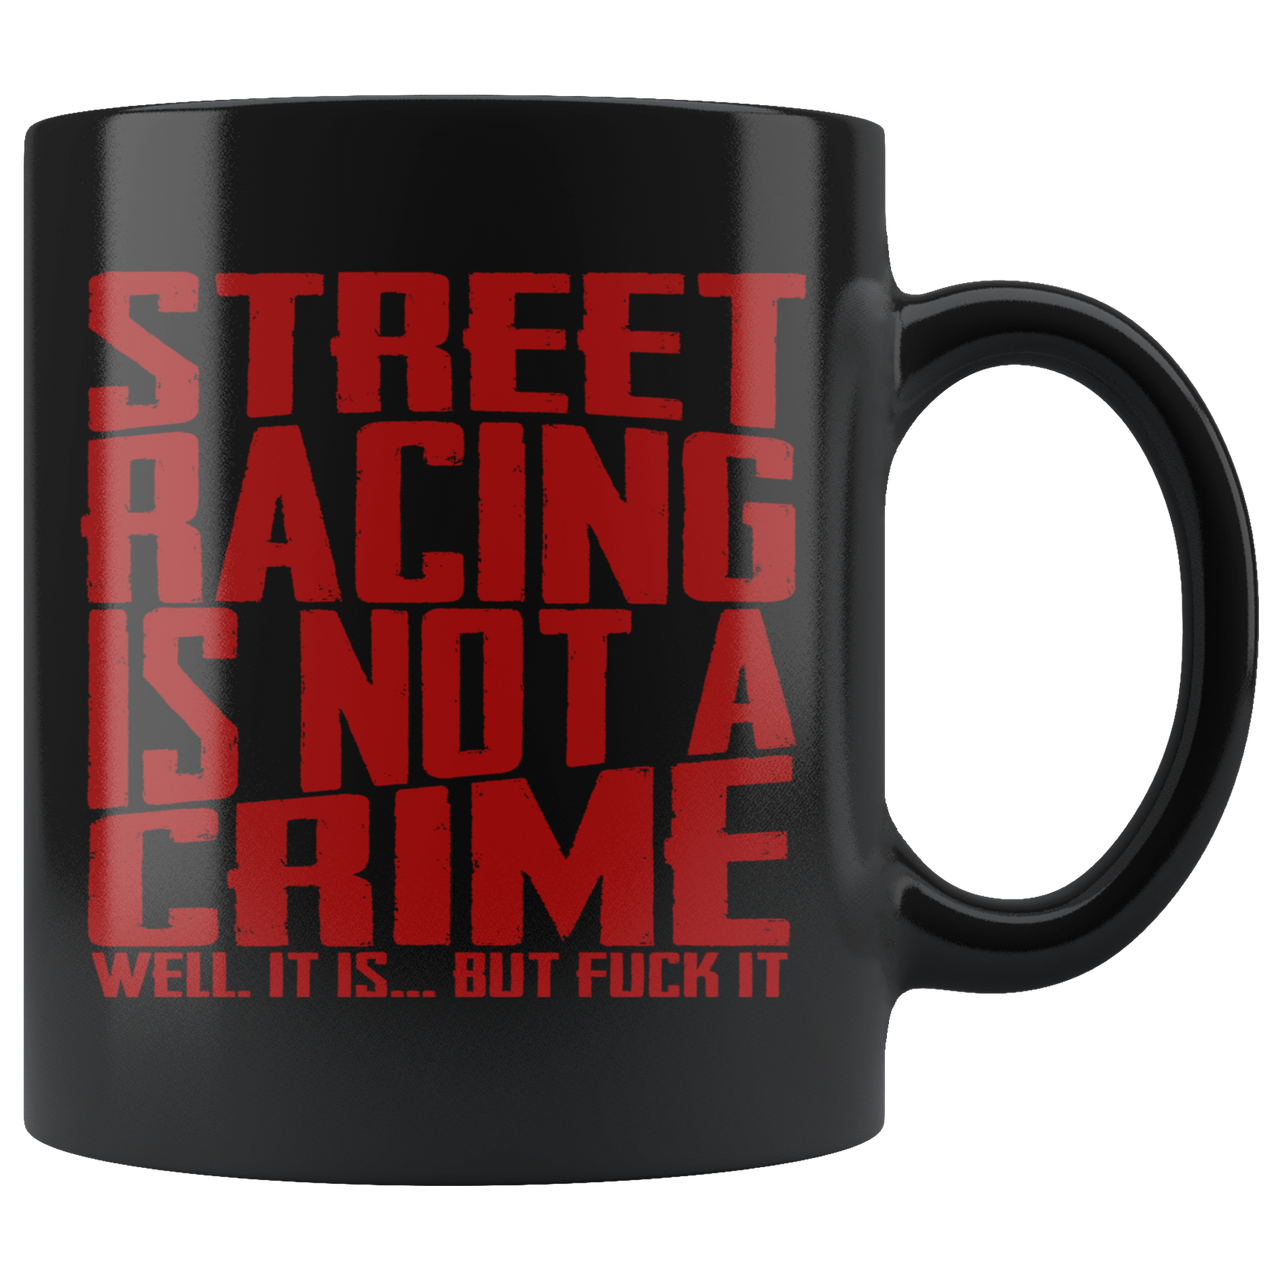 Street Racing Is Not A Crime Well it Is But Screw It RedV Mug!